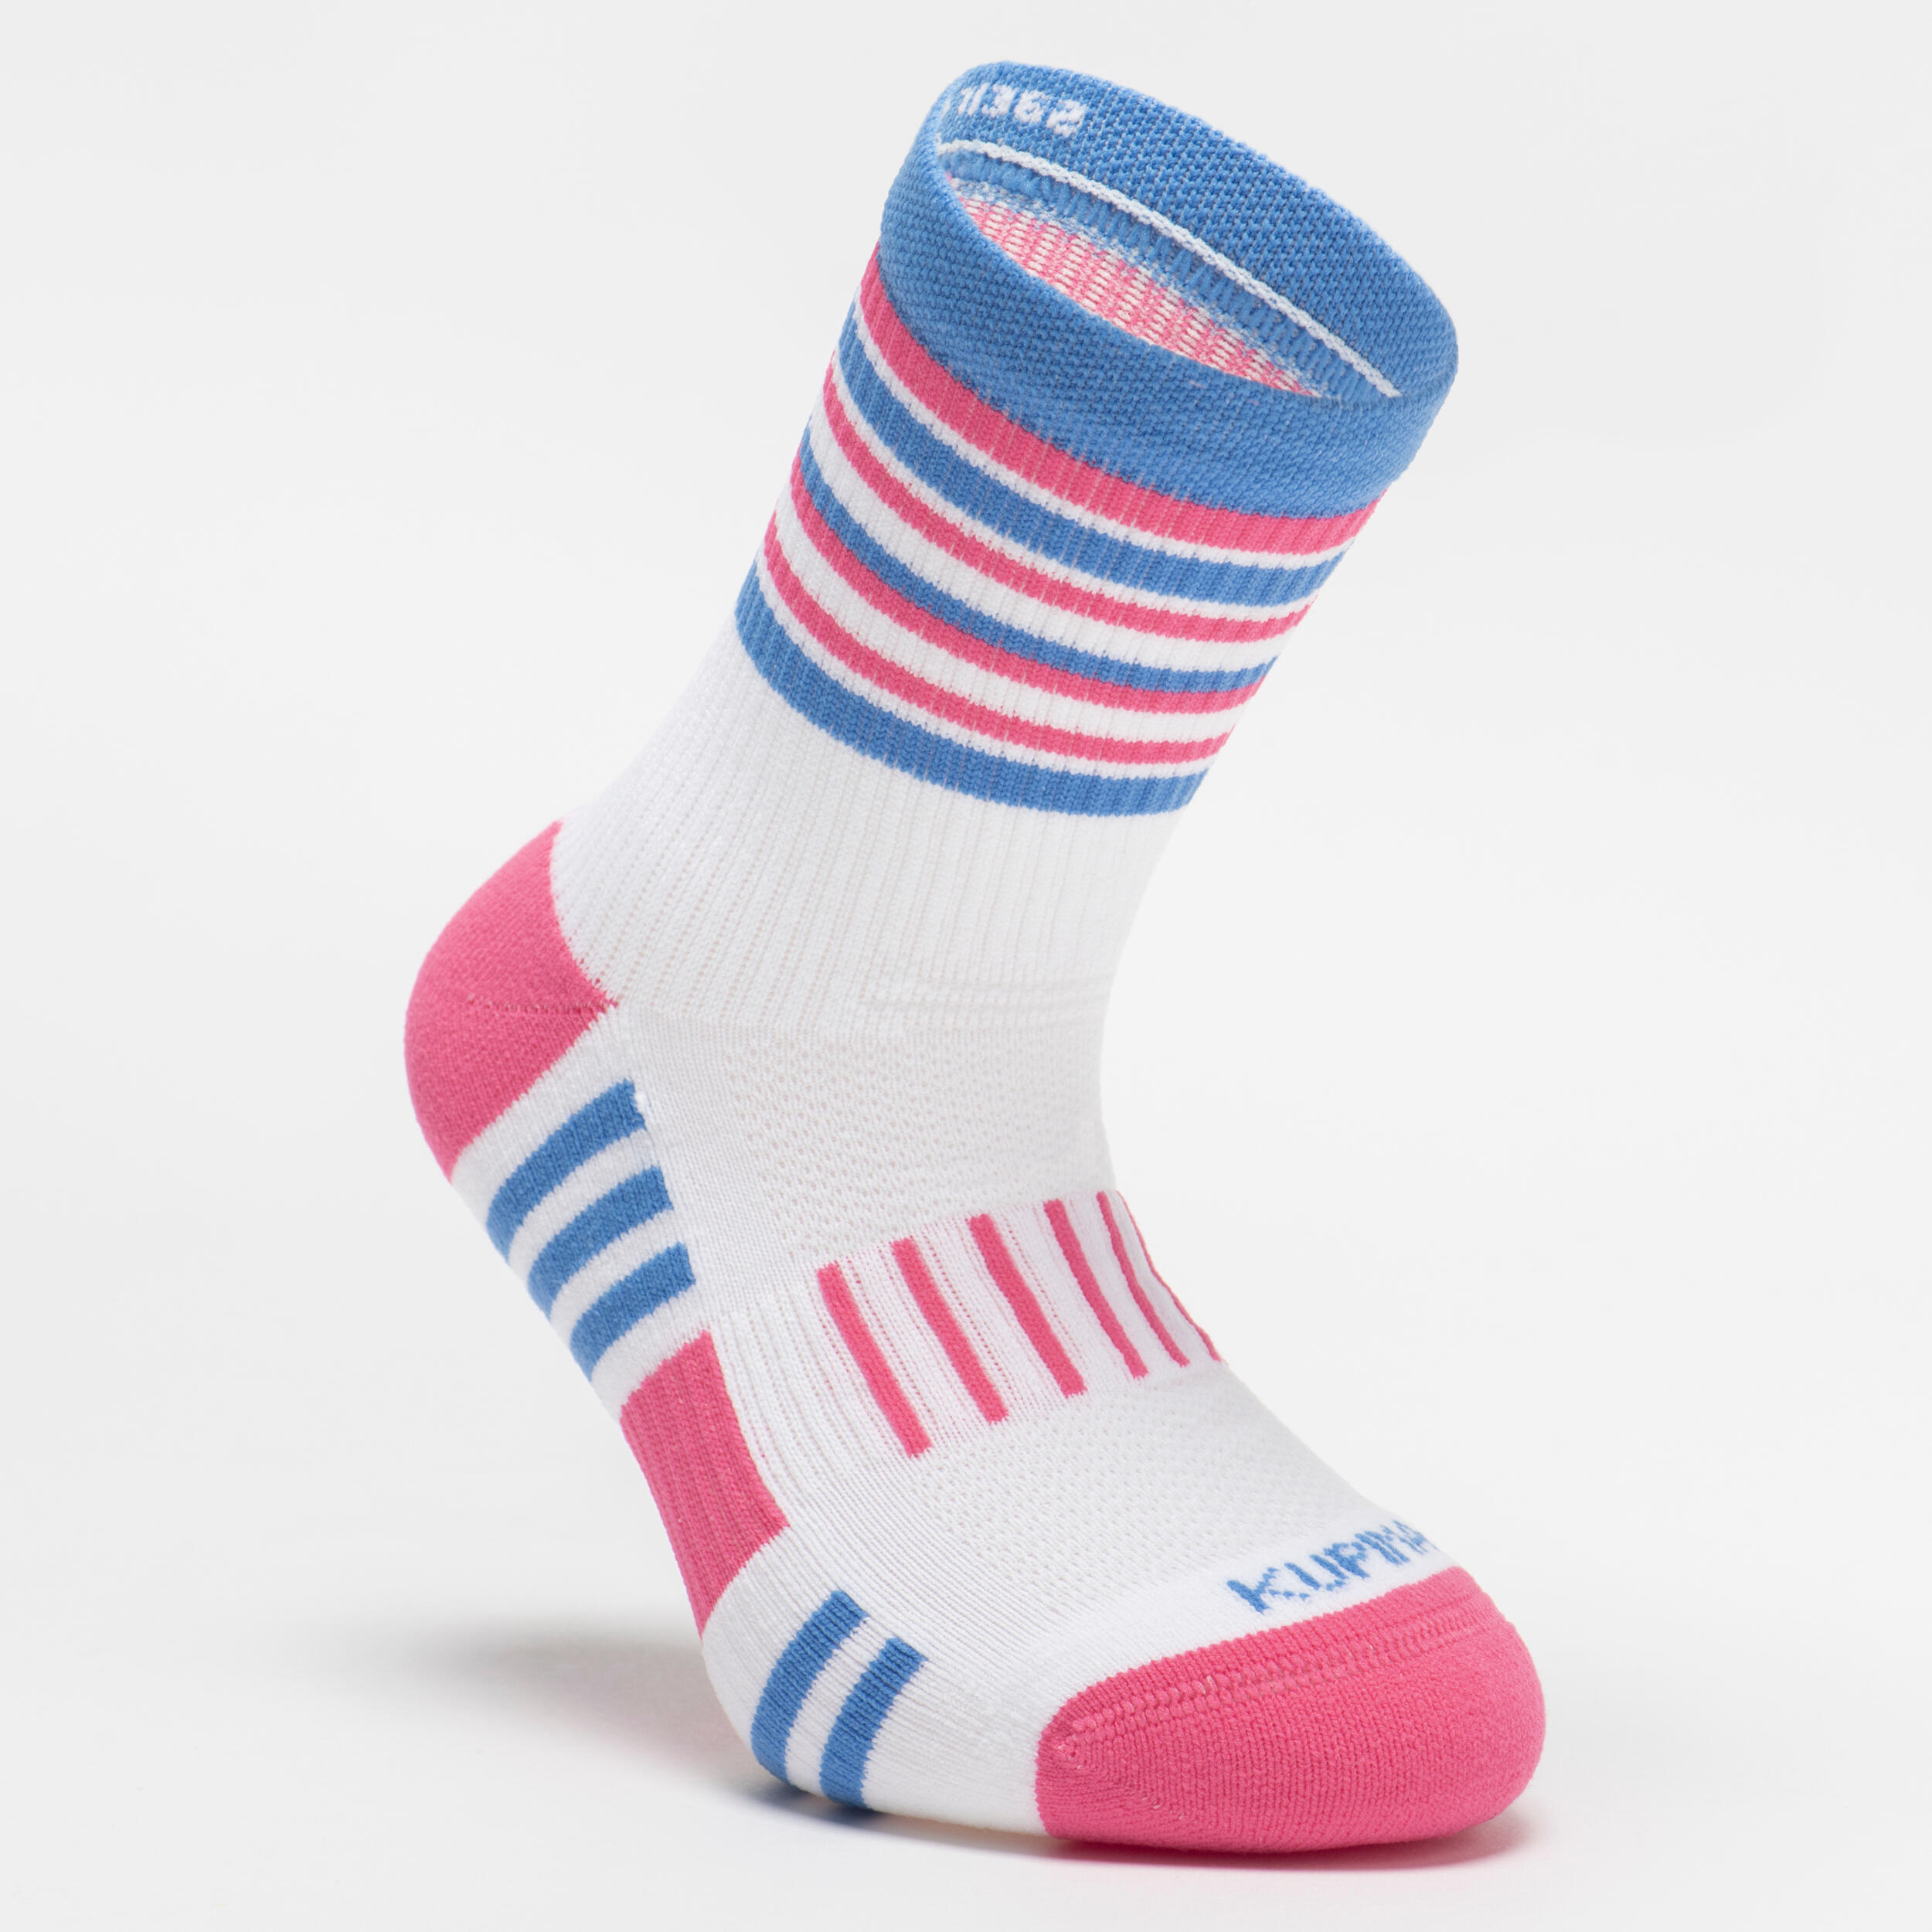 Kids' Socks AT 500 Mid 2-Pack - Plain Pink and White Pink Blue Stripes 3/13